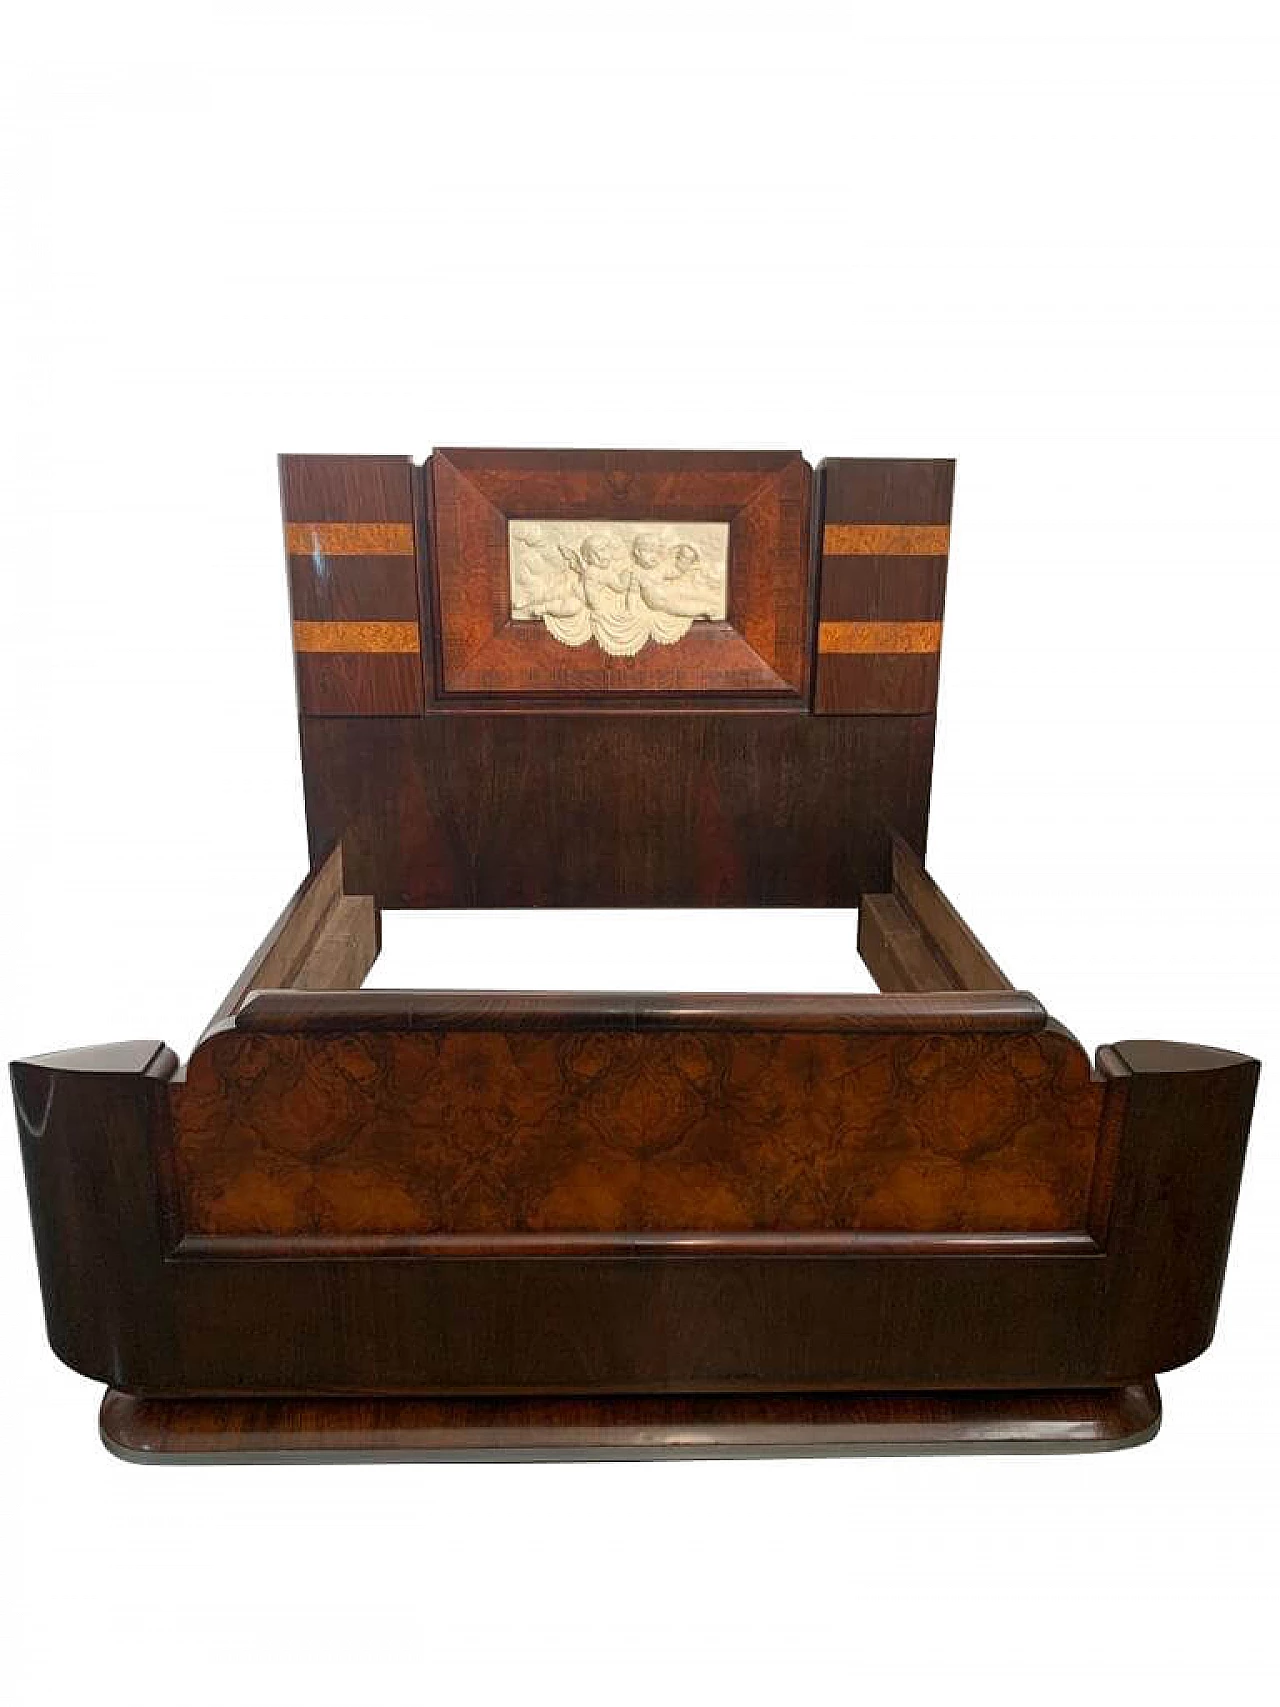 Art Deco bed in walnut and rosewood with carved headboard, 1920s 1213490